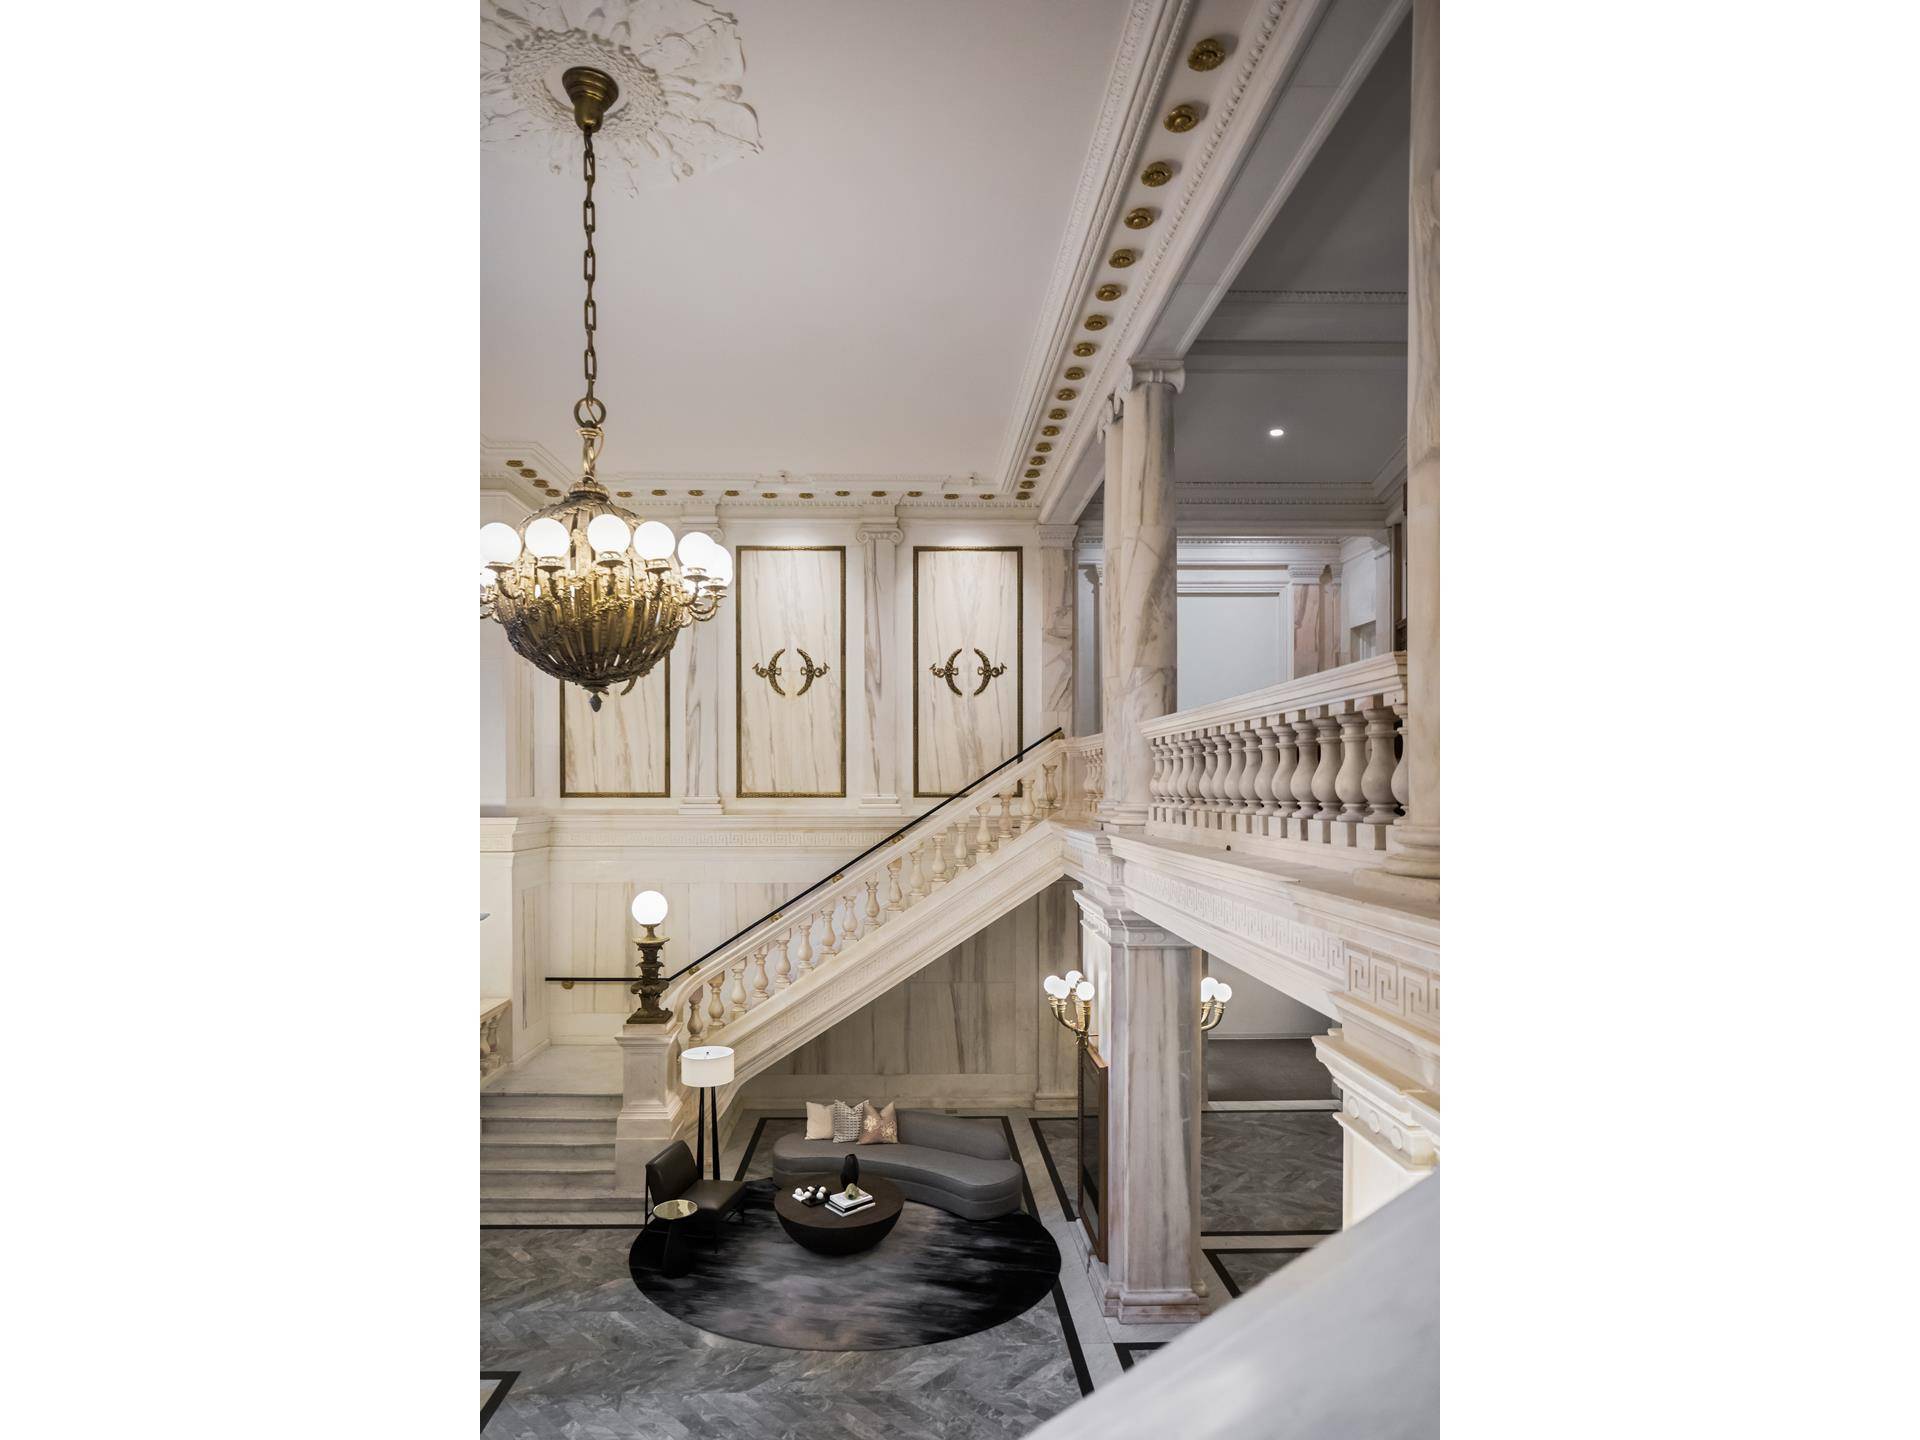 Immediate Occupancy. Paying homage to the most coveted elements of an architectural masterpiece at 108 Leonard, ornamental majesty and historic provenance are leveraged anew with fresh modern forms and contemporary ...